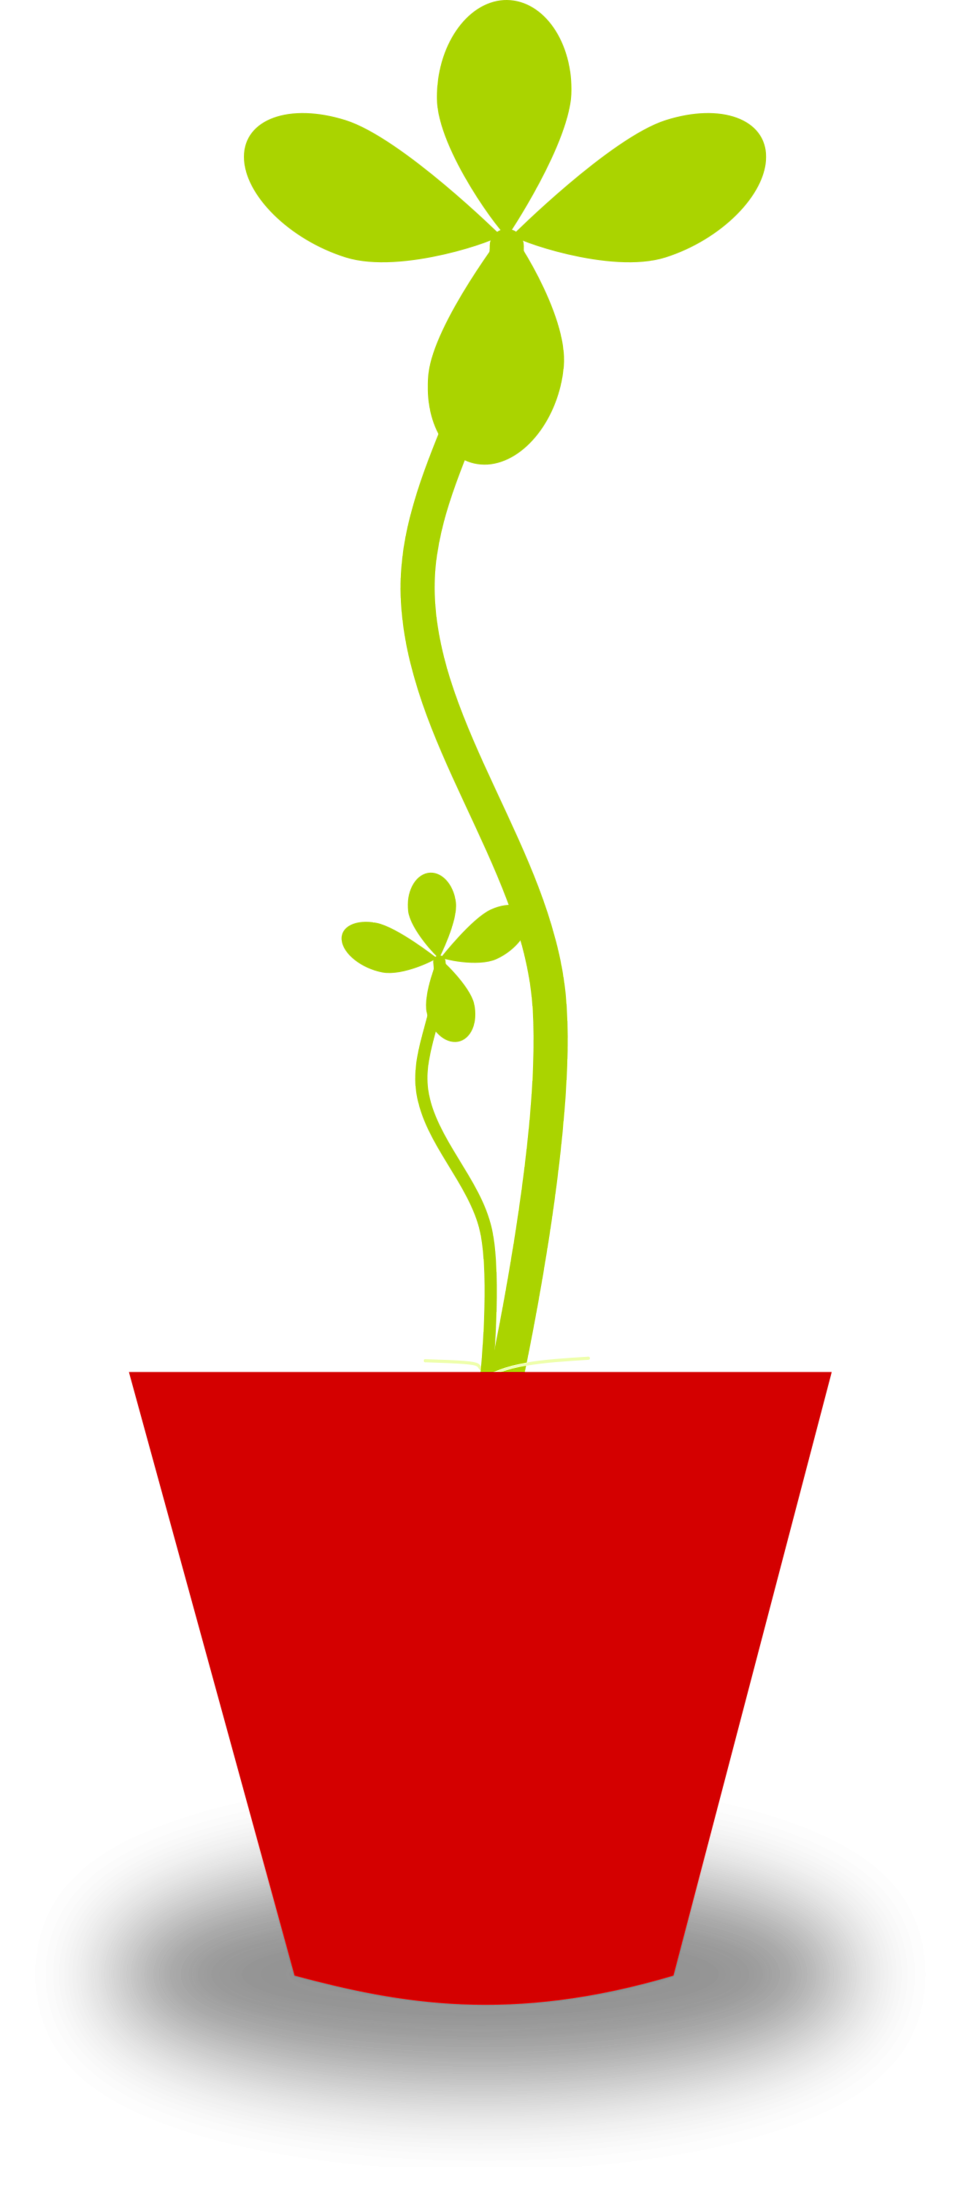 seedling clipart healthy plant